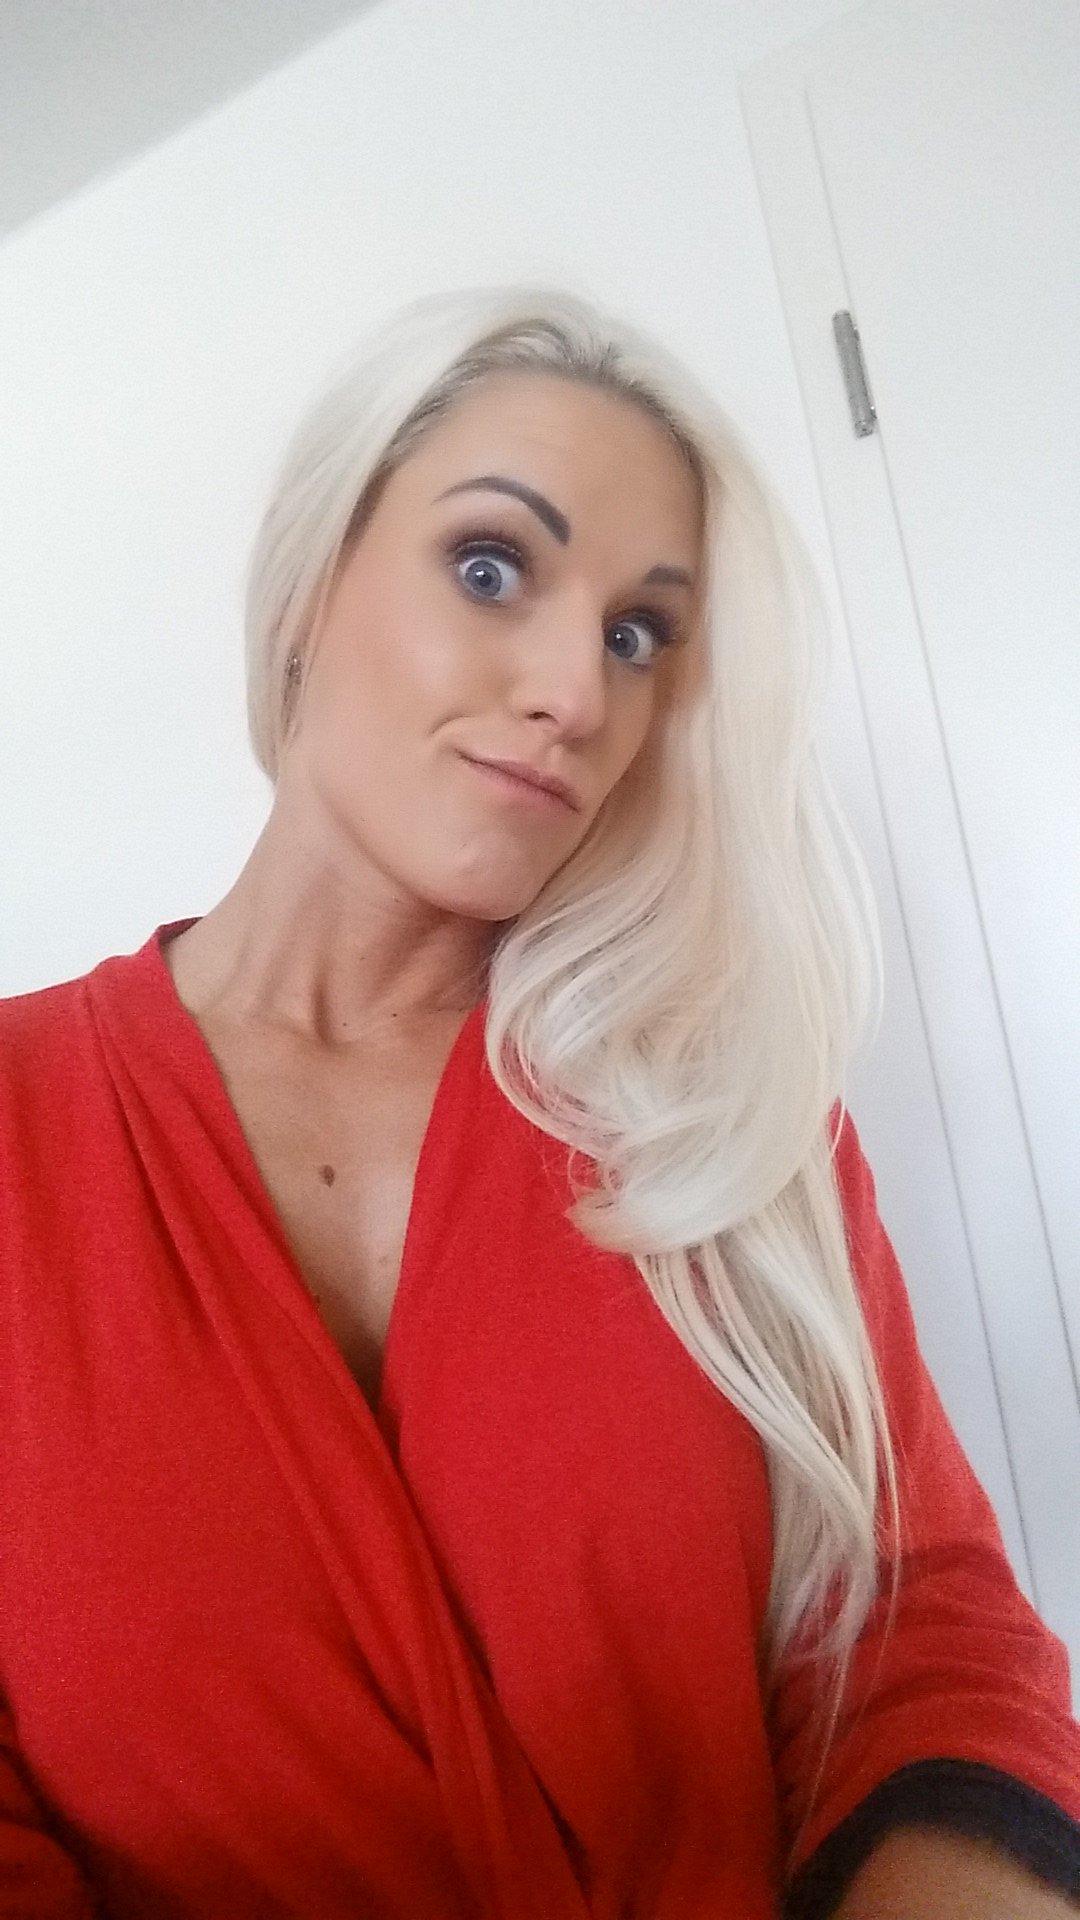 Tw Pornstars 1 Pic Blanche Bradburry 🔞 Official Twitter When You Are At Work 😁 Selfies 😀